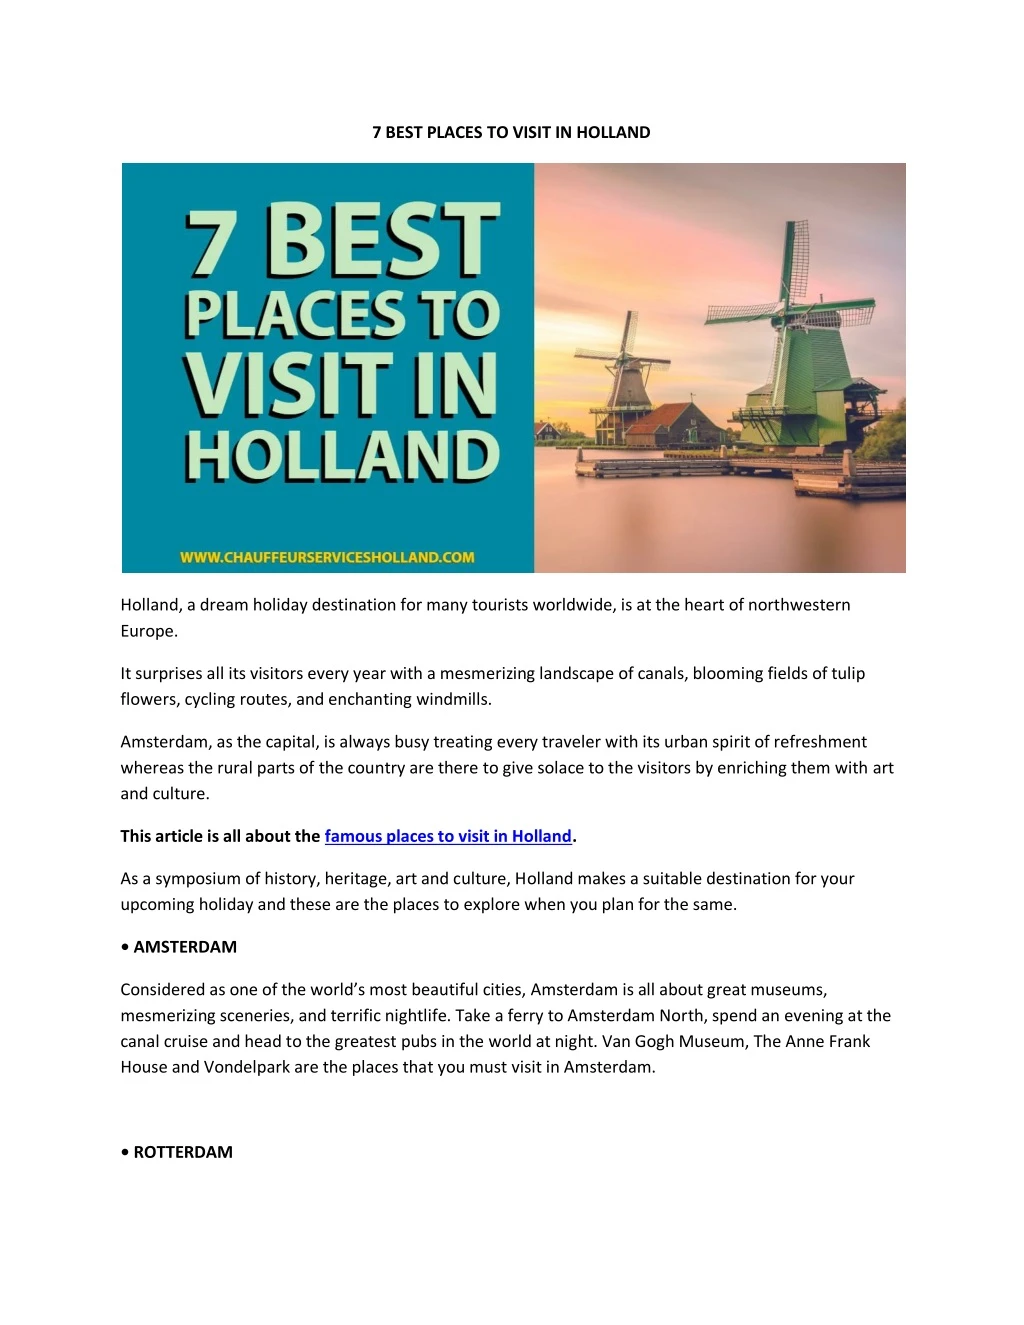 7 best places to visit in holland